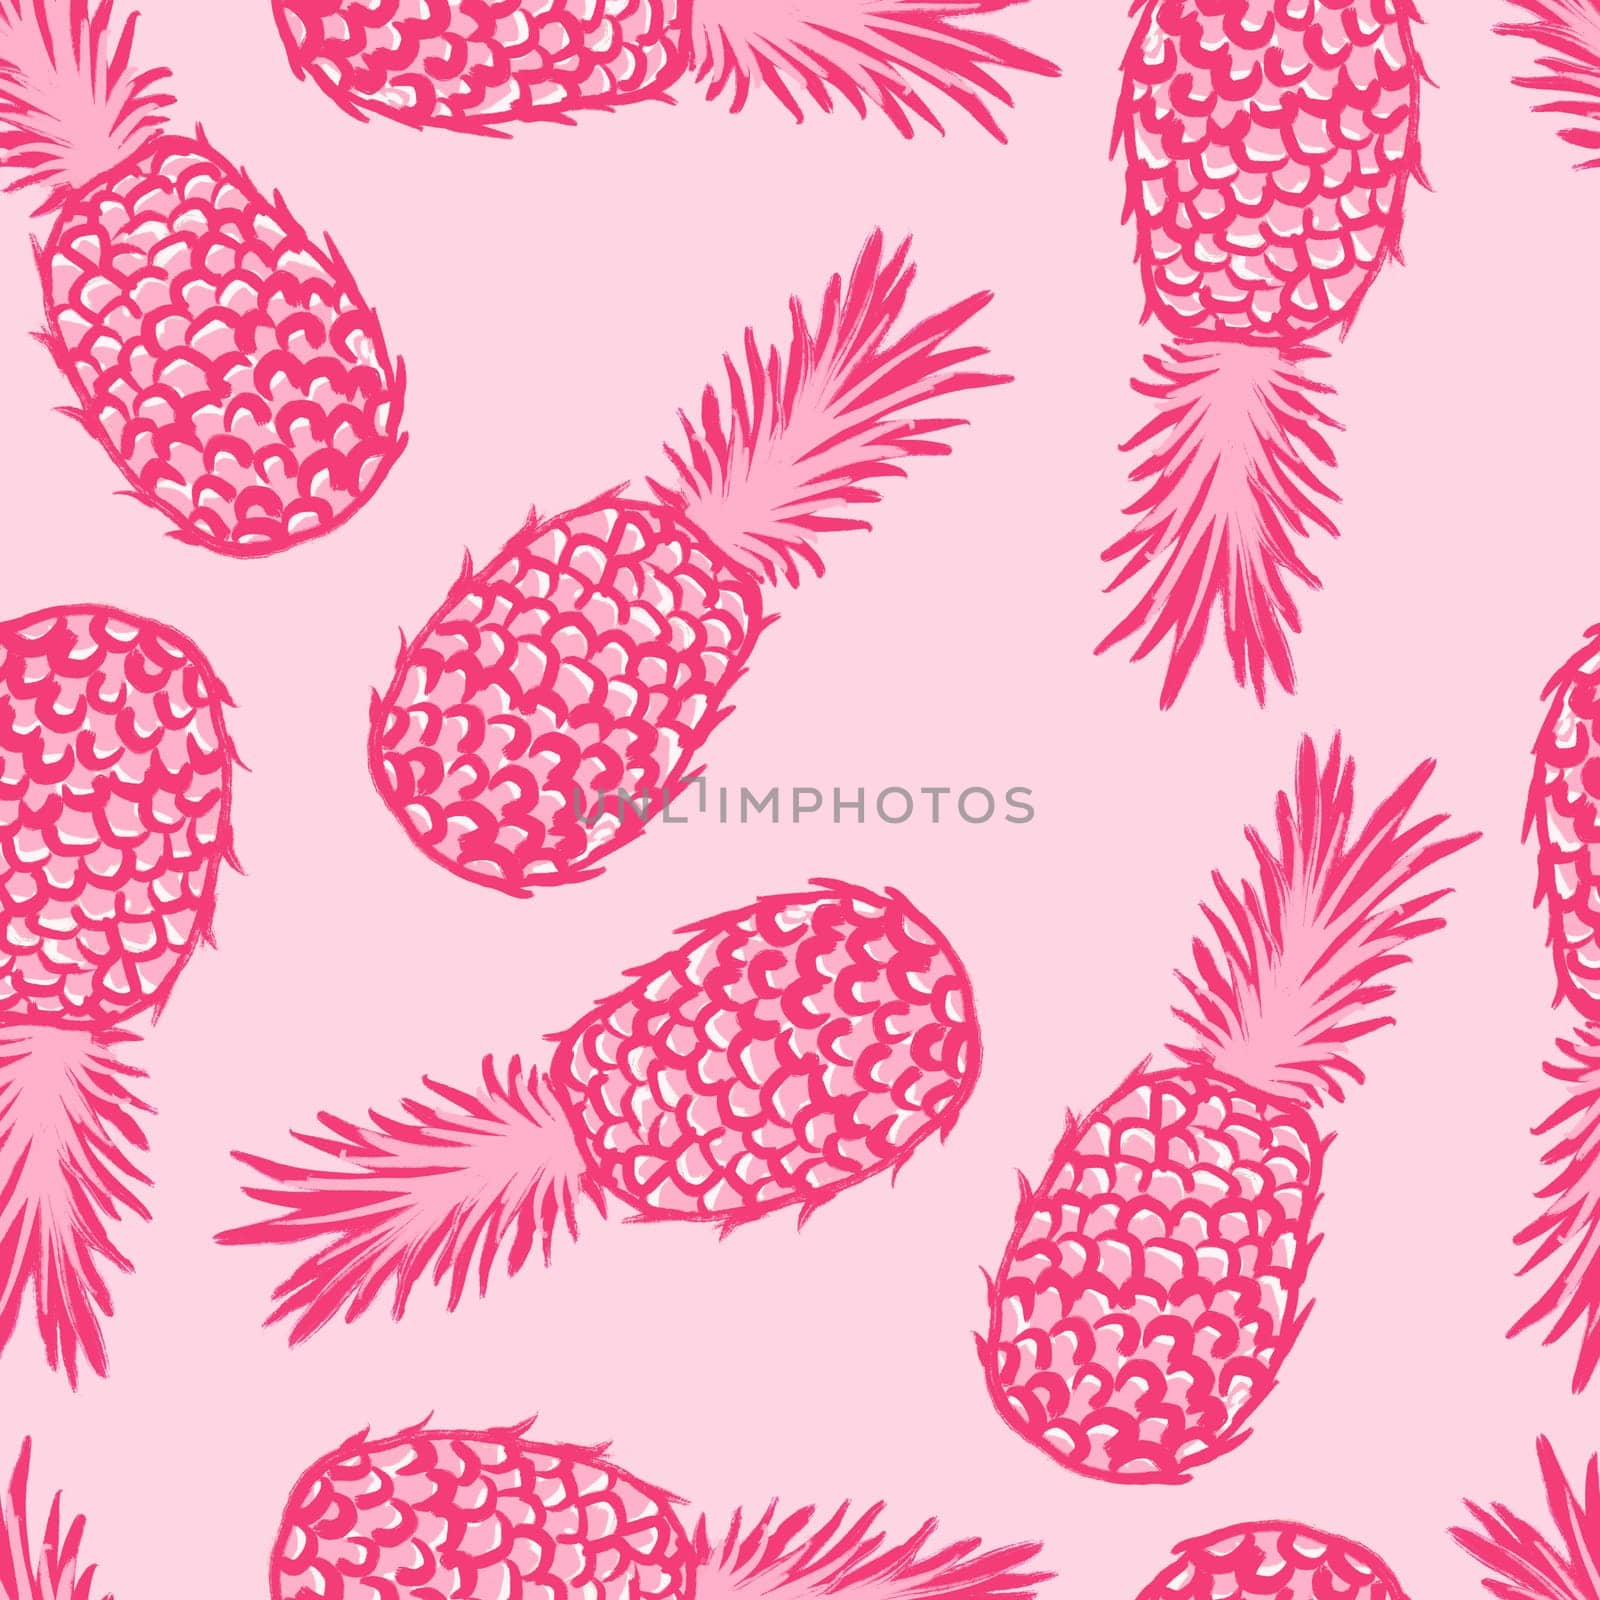 Hand drawn seamless pattern illustration of fruit pineapple, pink tropical dessert food, bright colorful sketch style. Eating vegetarian summer diet, tasty delicious groceries organic nature design.trendy sketch doodle